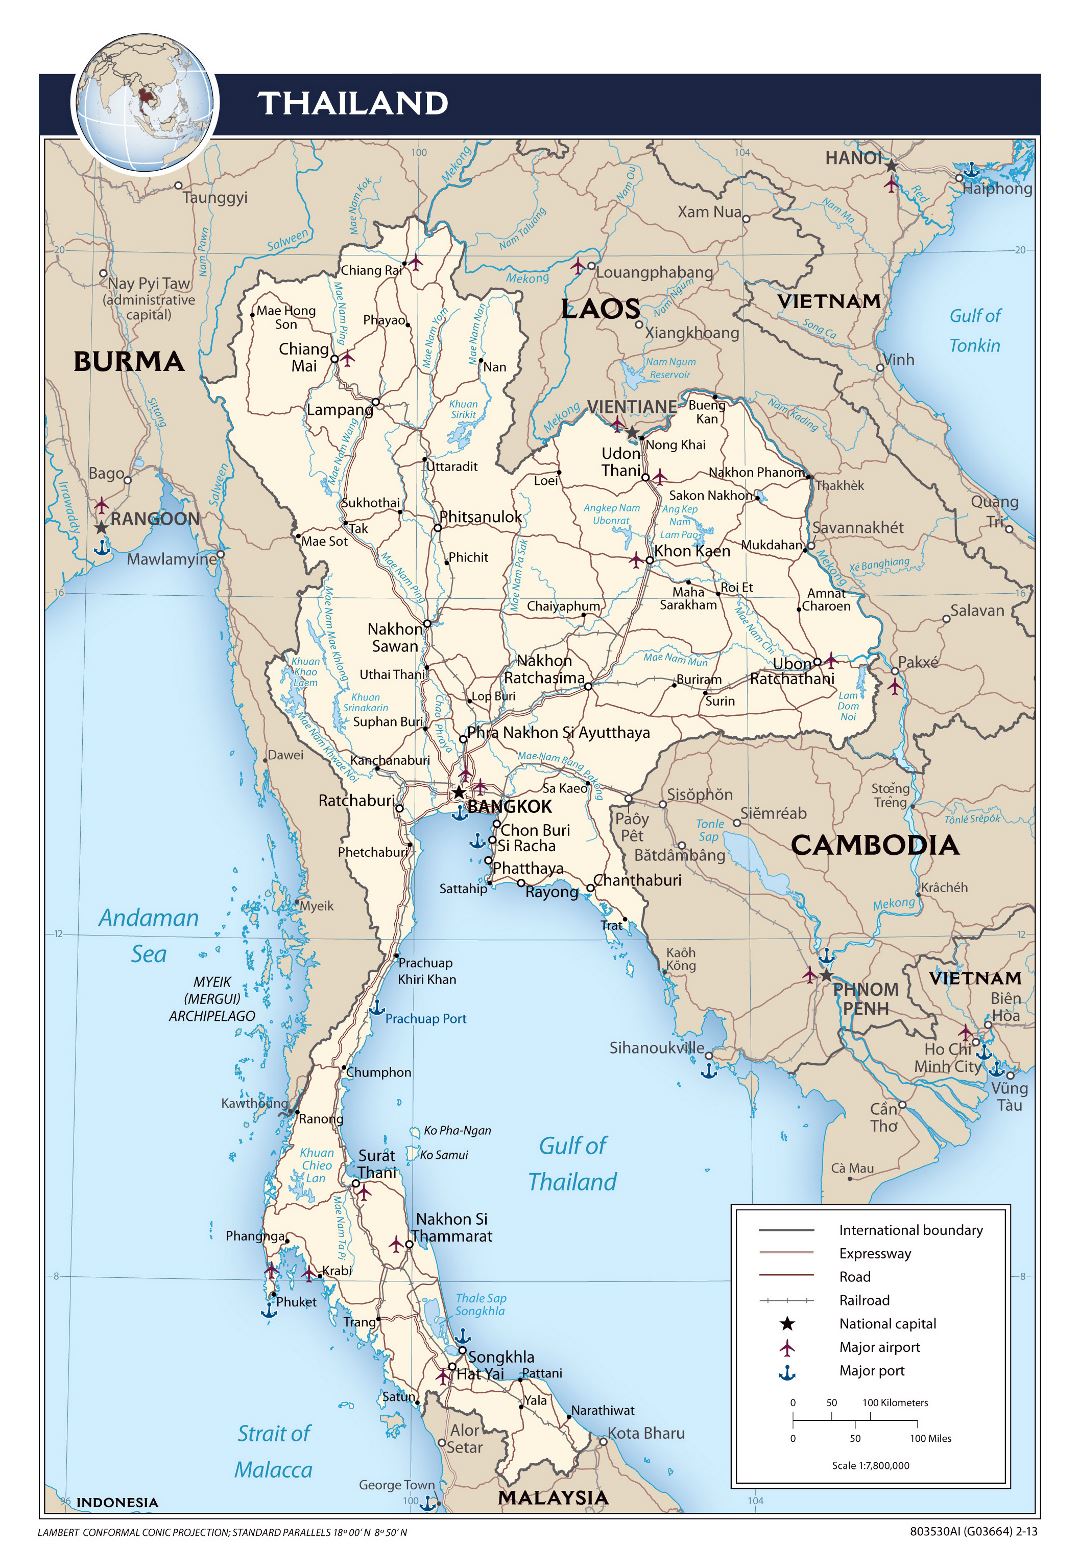 Large political map of Thailand with roads, railroads, major cities, airports and ports - 2013